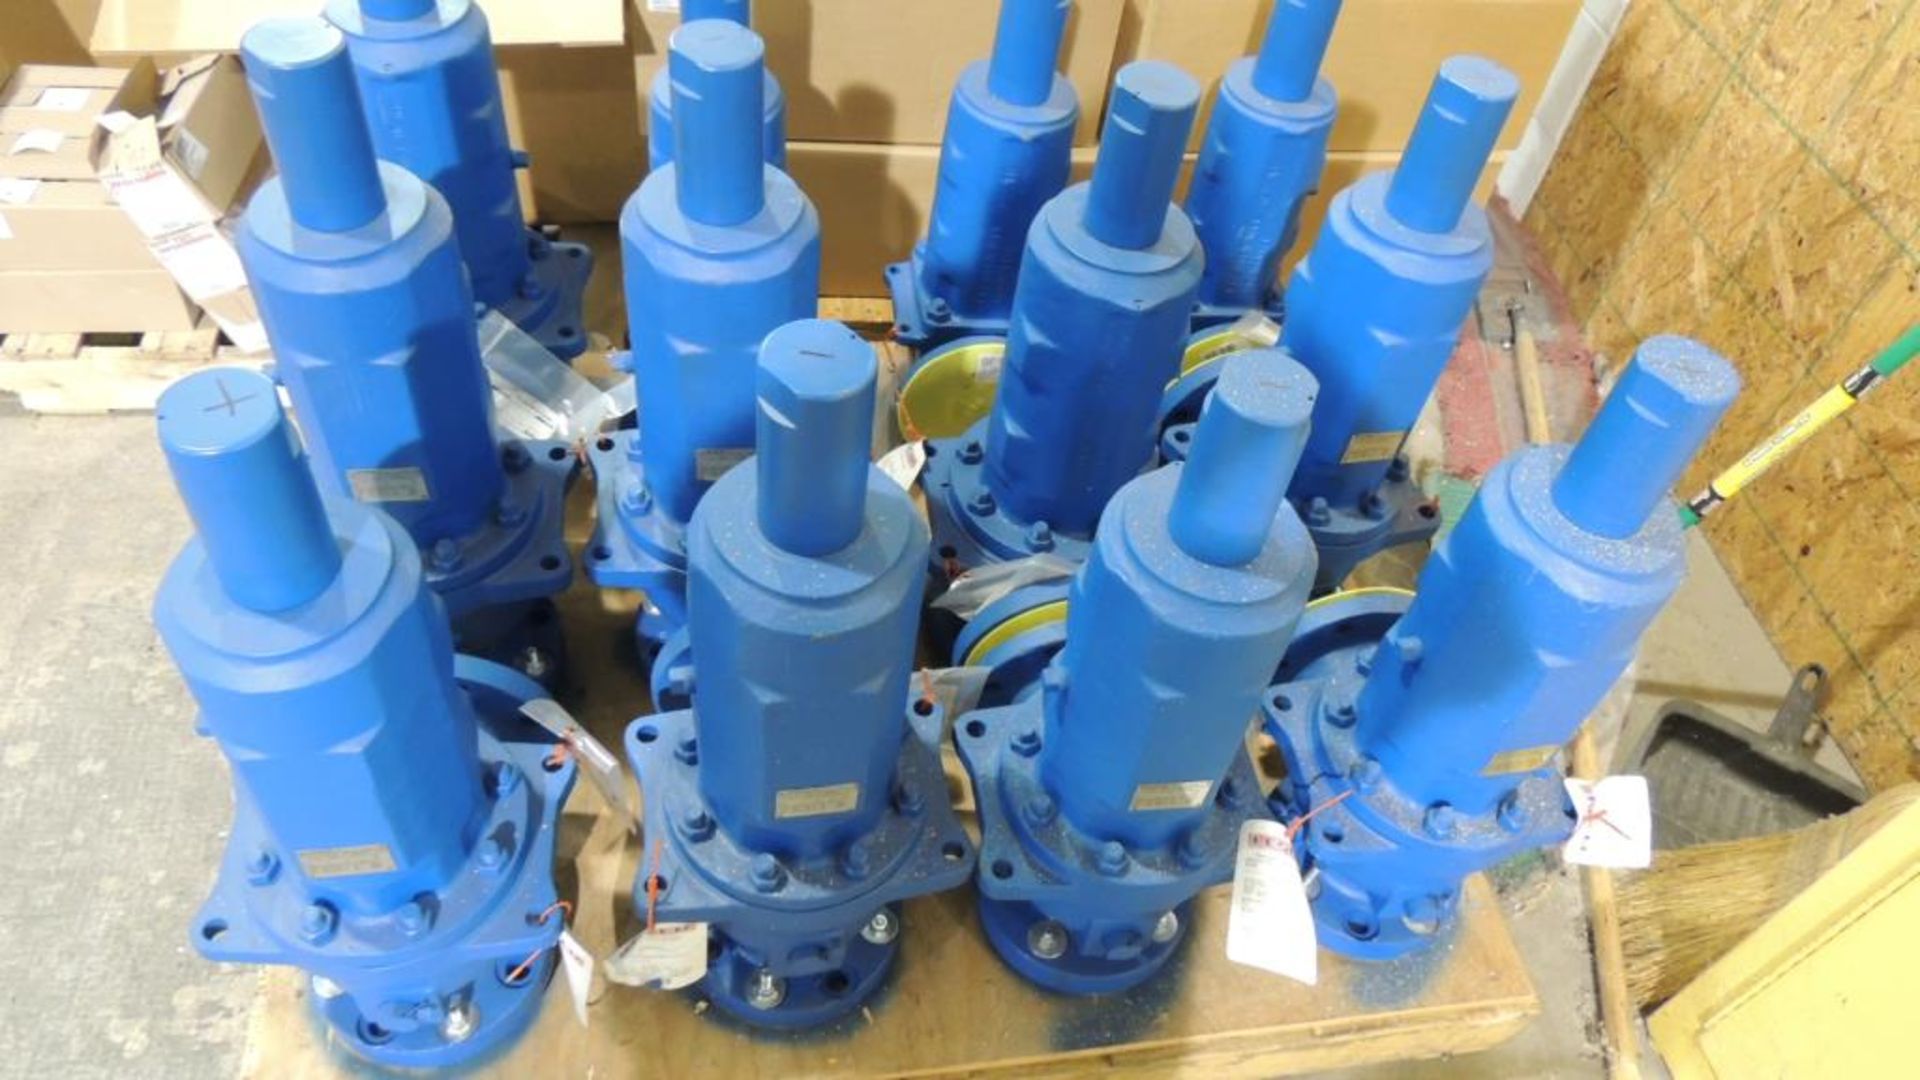 Large Quantity of Leser Relief and Safety Valves, plus Spare Parts Kits - Image 8 of 374